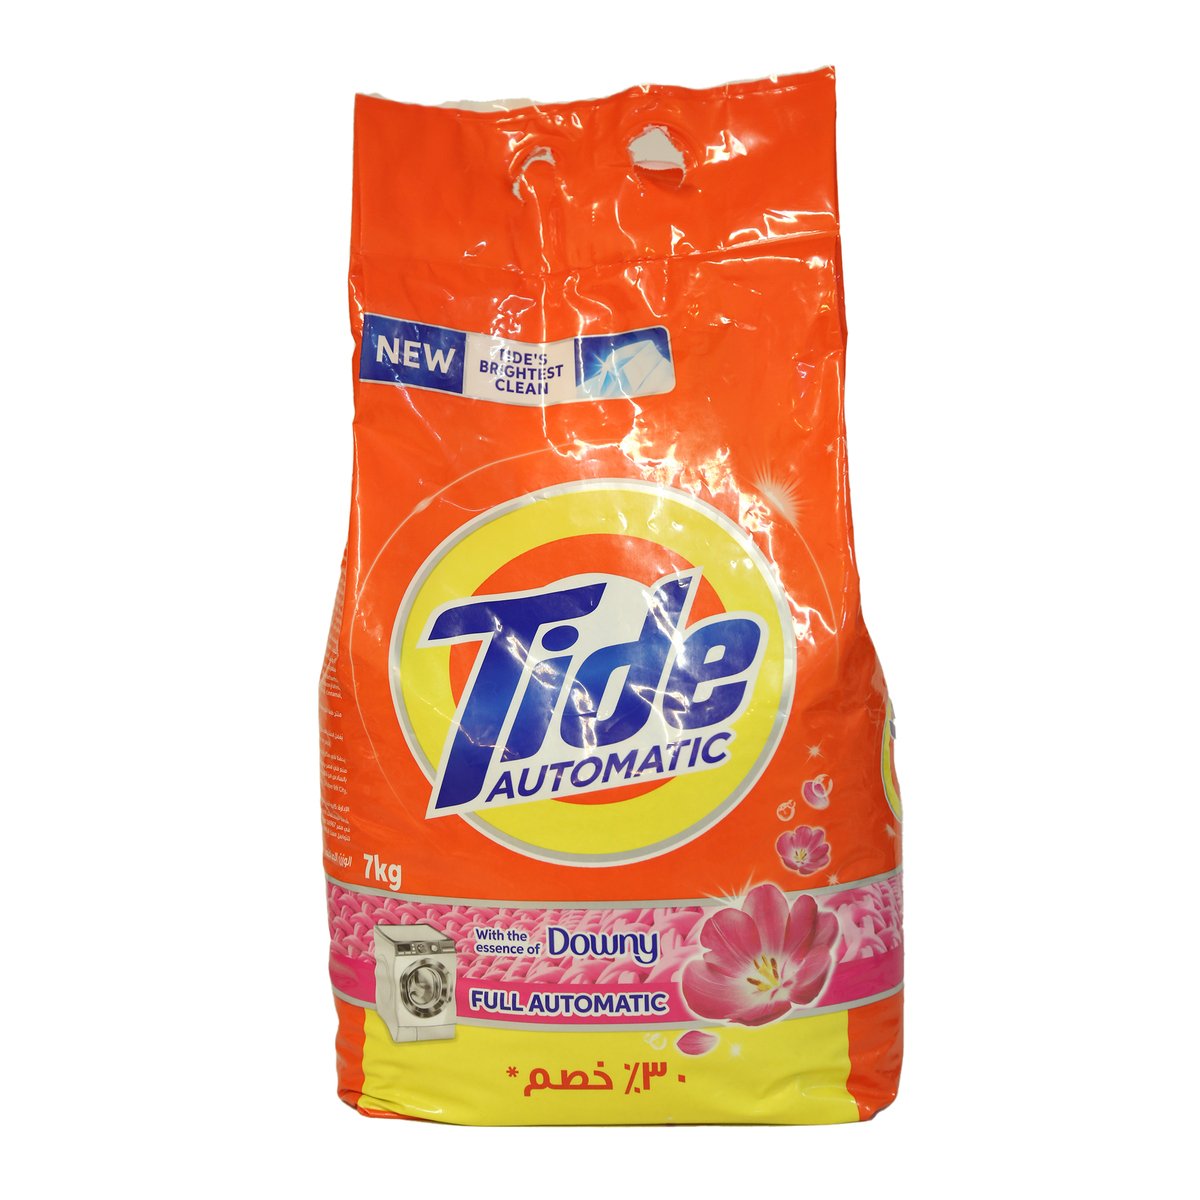 Buy Tide Full Automatic Washing Powder With Downy 7kg Online at Best Price | Front load washing powders | Lulu Egypt in Egypt